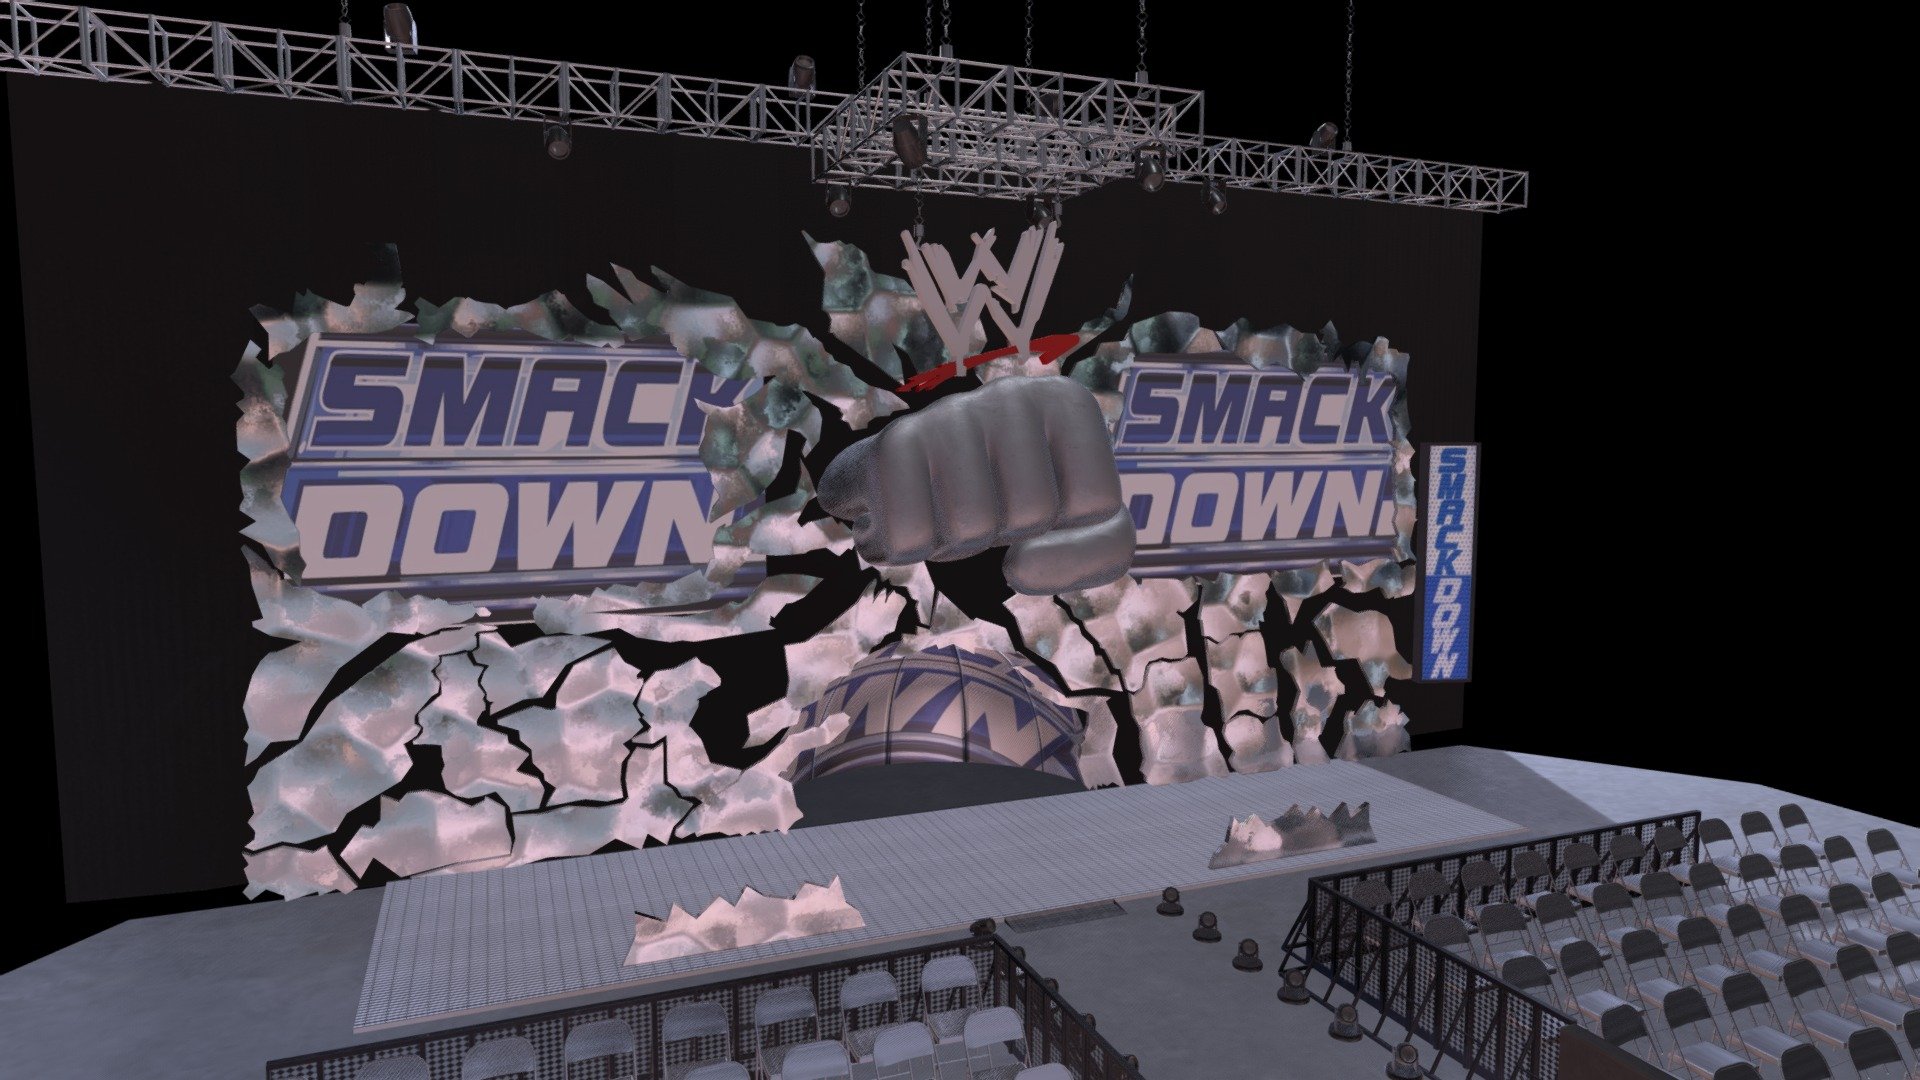 Update:
You can now purchase this arena on turbo squid by searching for &ldquo;WWE Wrestling Arena